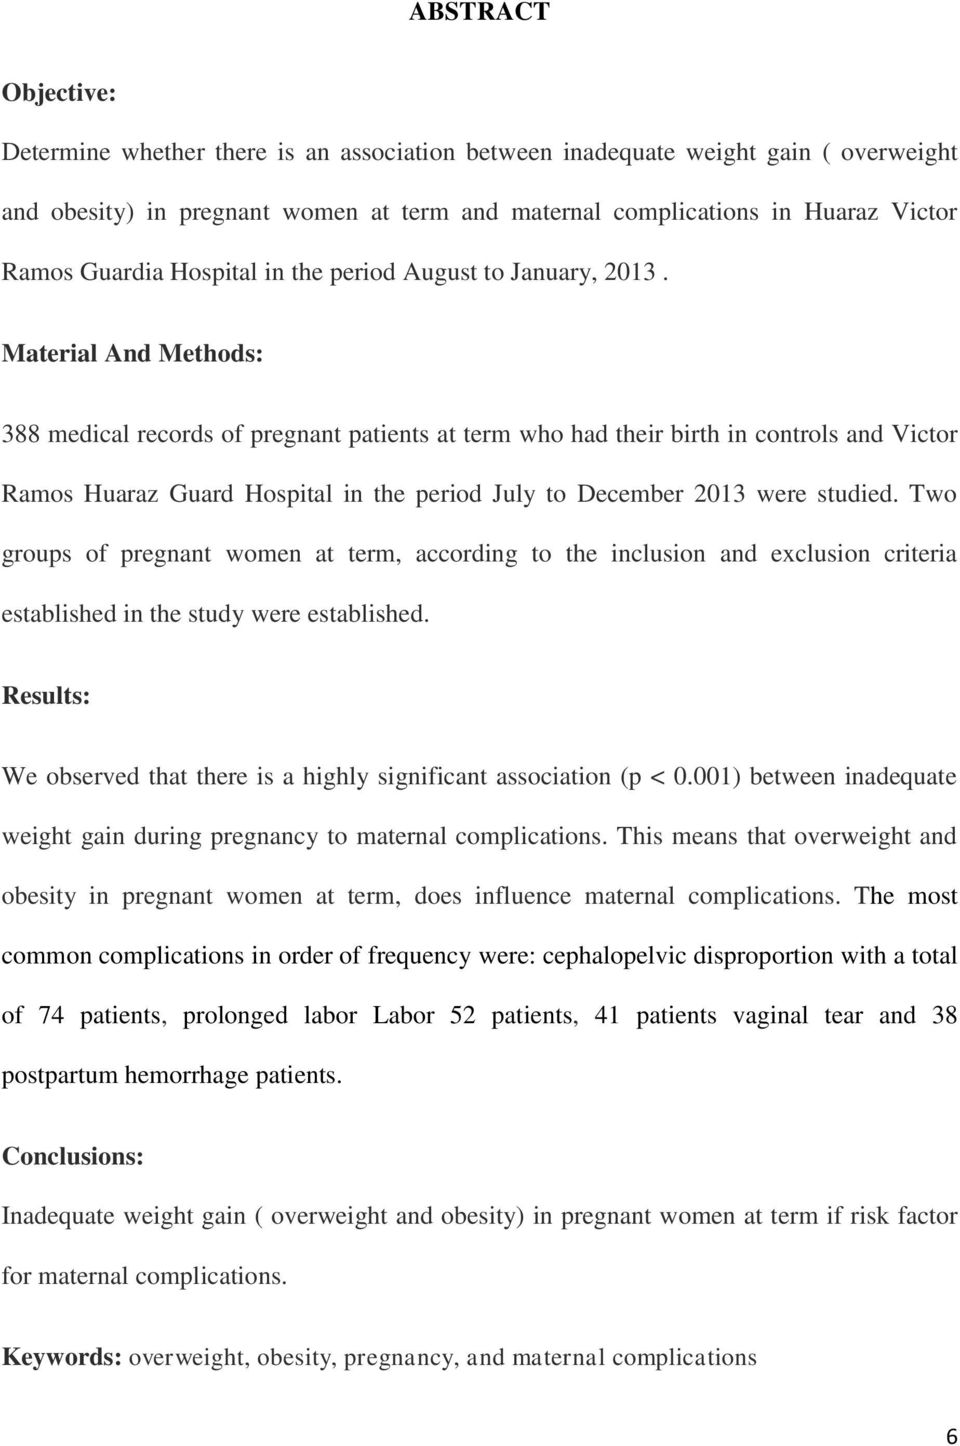 Material And Methods: 388 medical records of pregnant patients at term who had their birth in controls and Victor Ramos Huaraz Guard Hospital in the period July to December 2013 were studied.